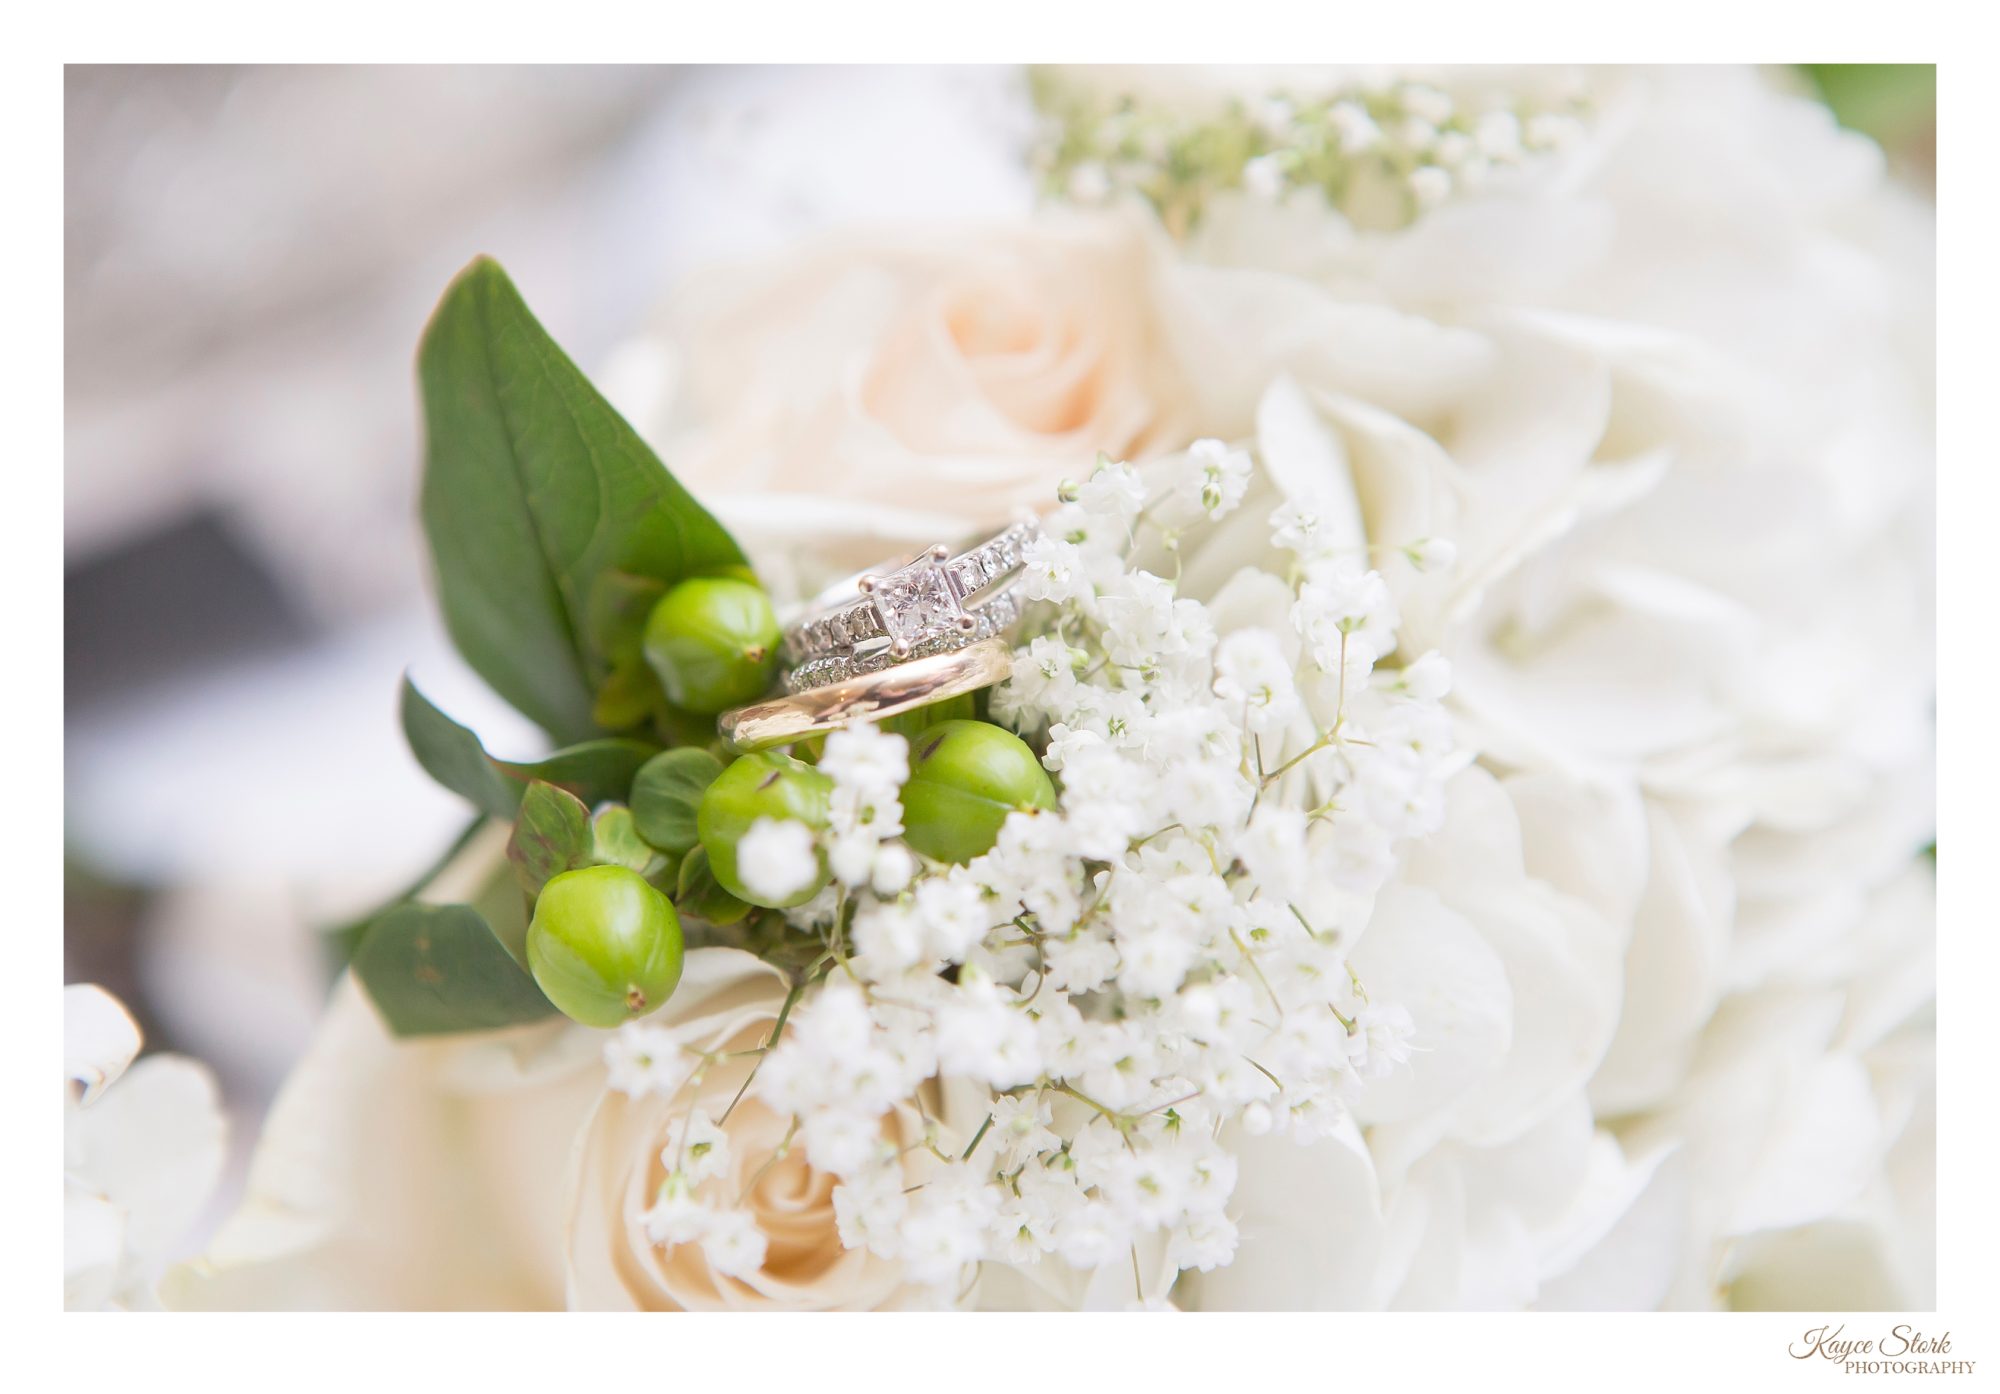 Bride and grooms wedding rings in brides bouquet by kayce stork photography